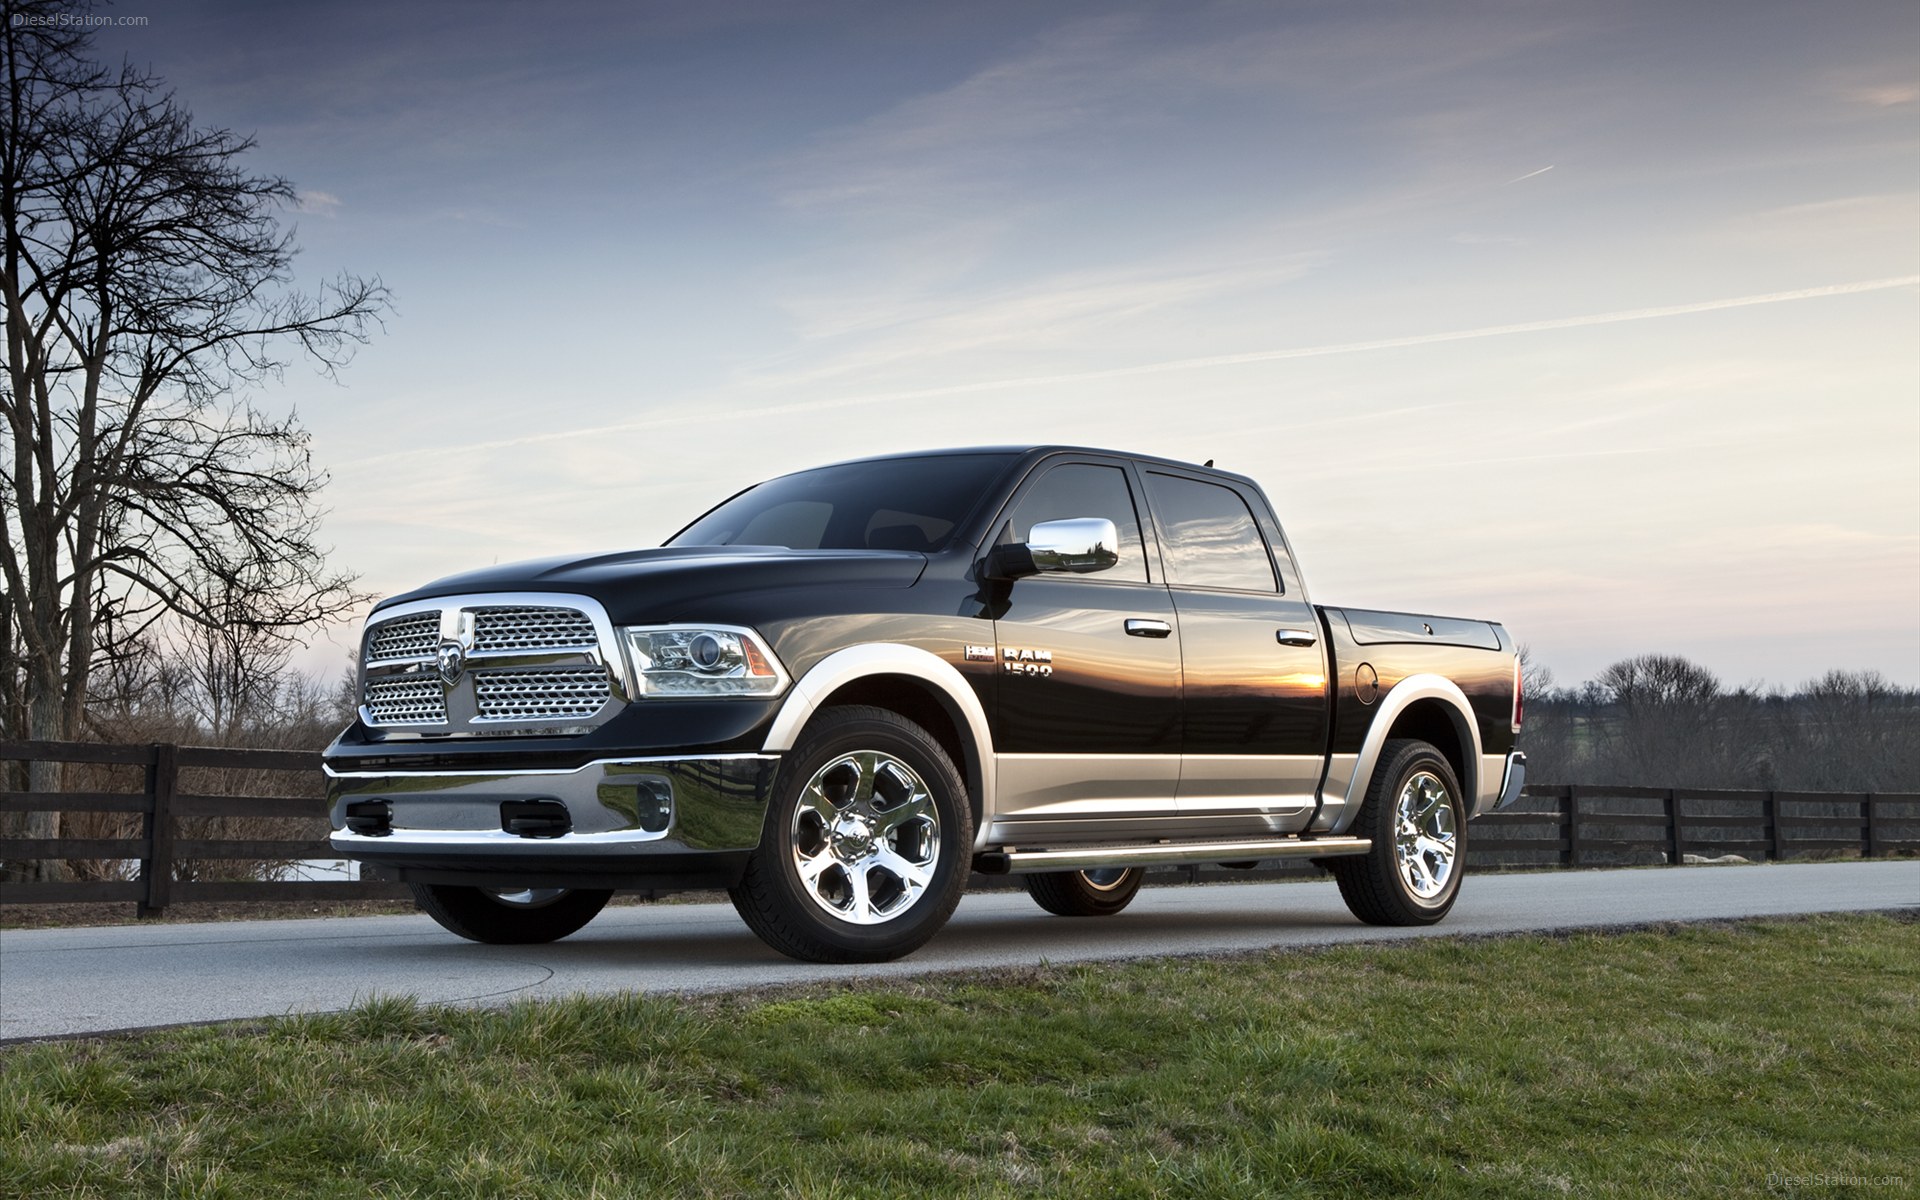 Dodge Ram Widescreen Exotic Car Pictures Of